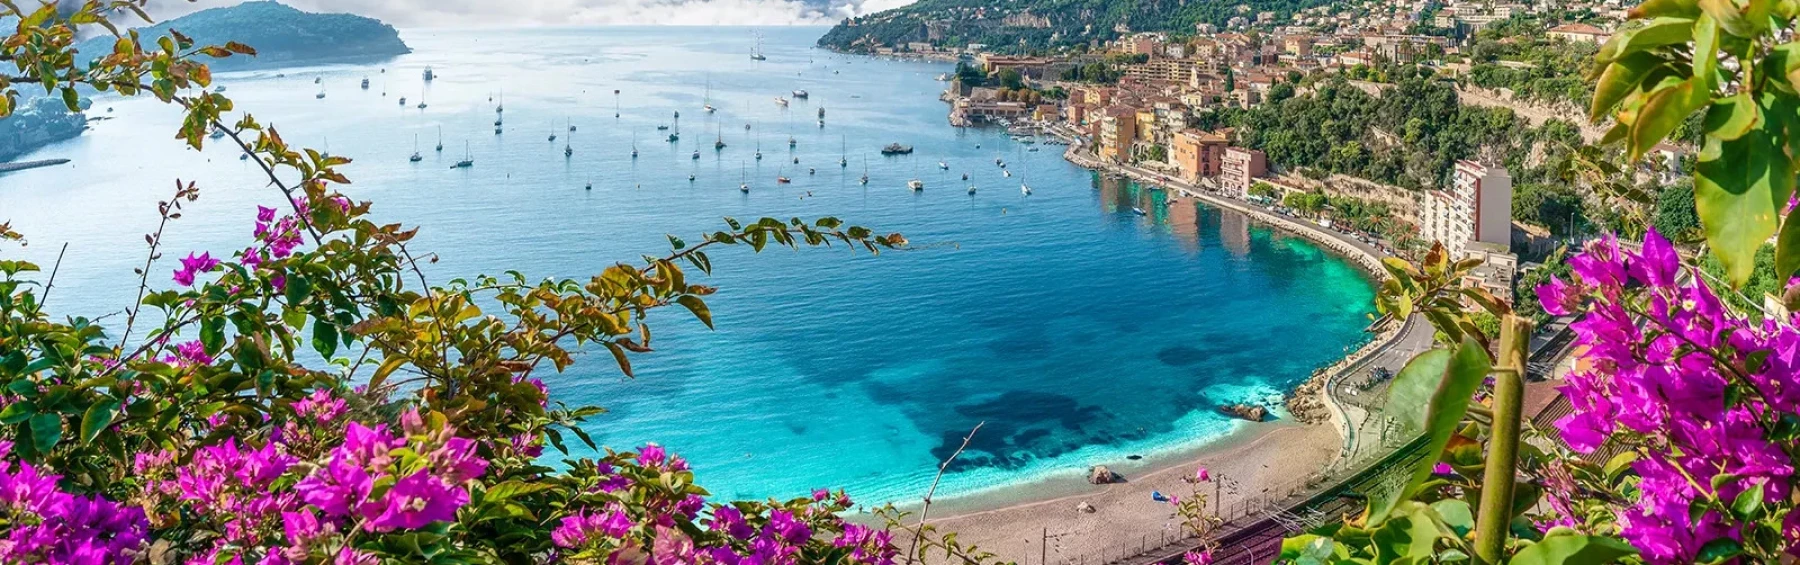 The French Riviera, France